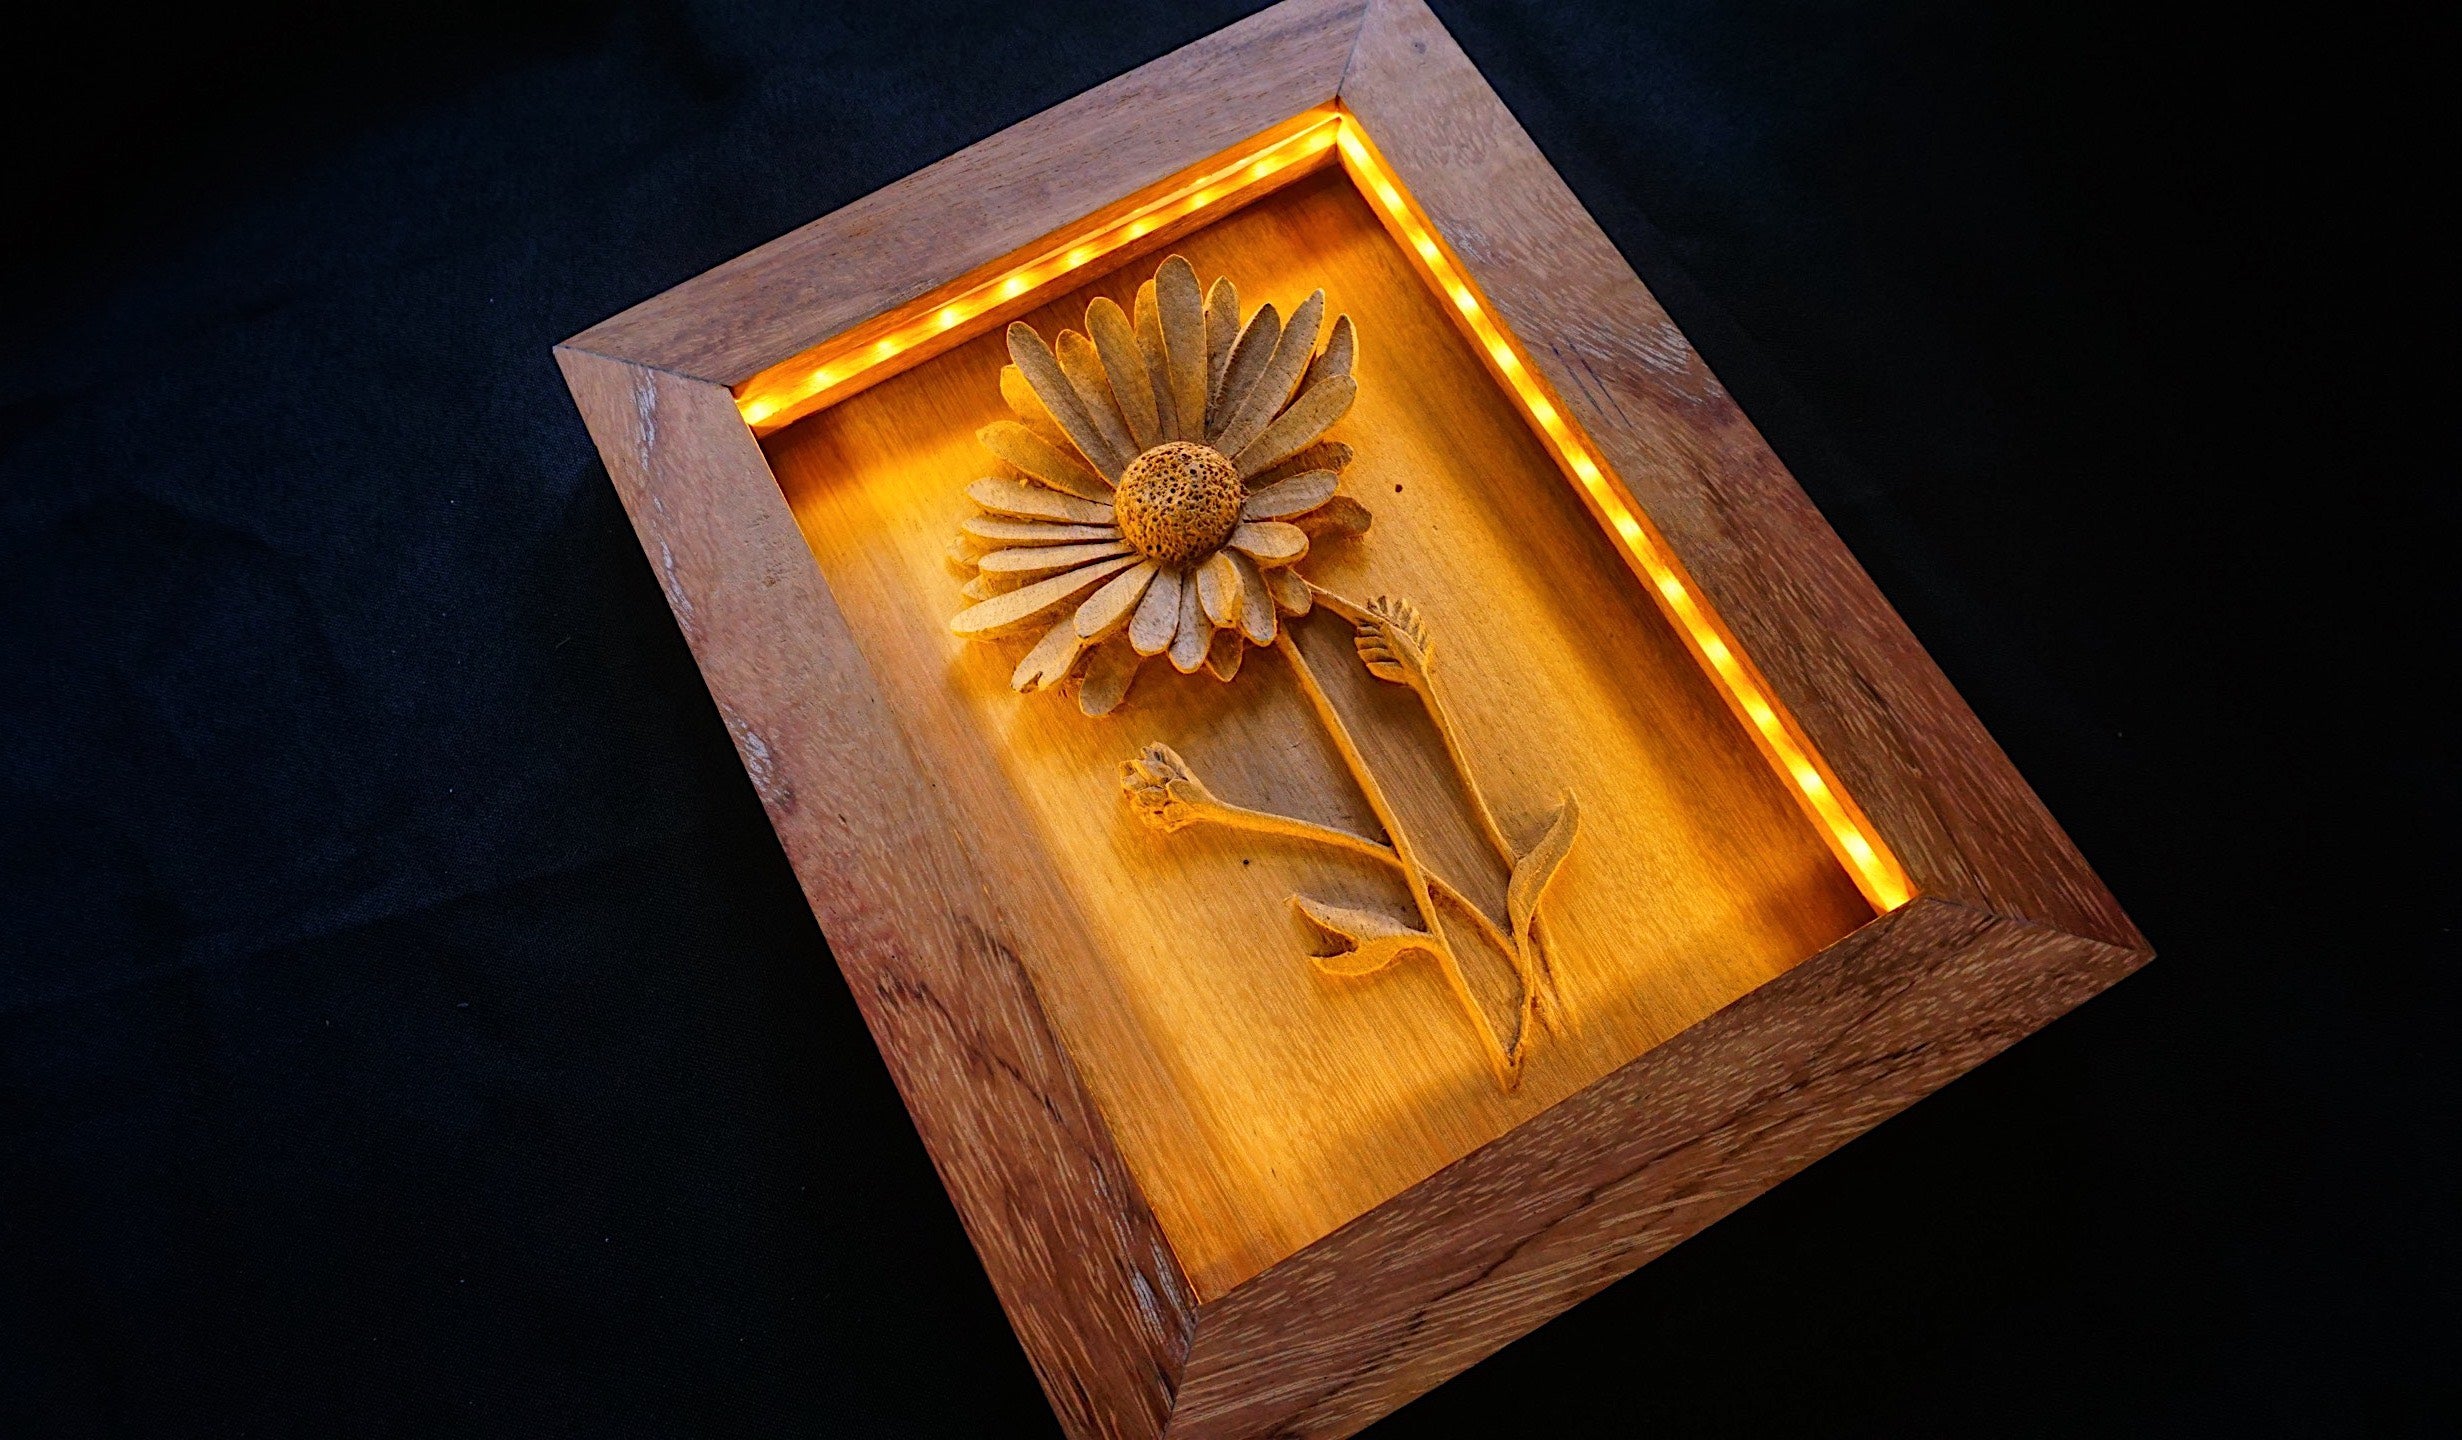 Daisy Flower wood Carving